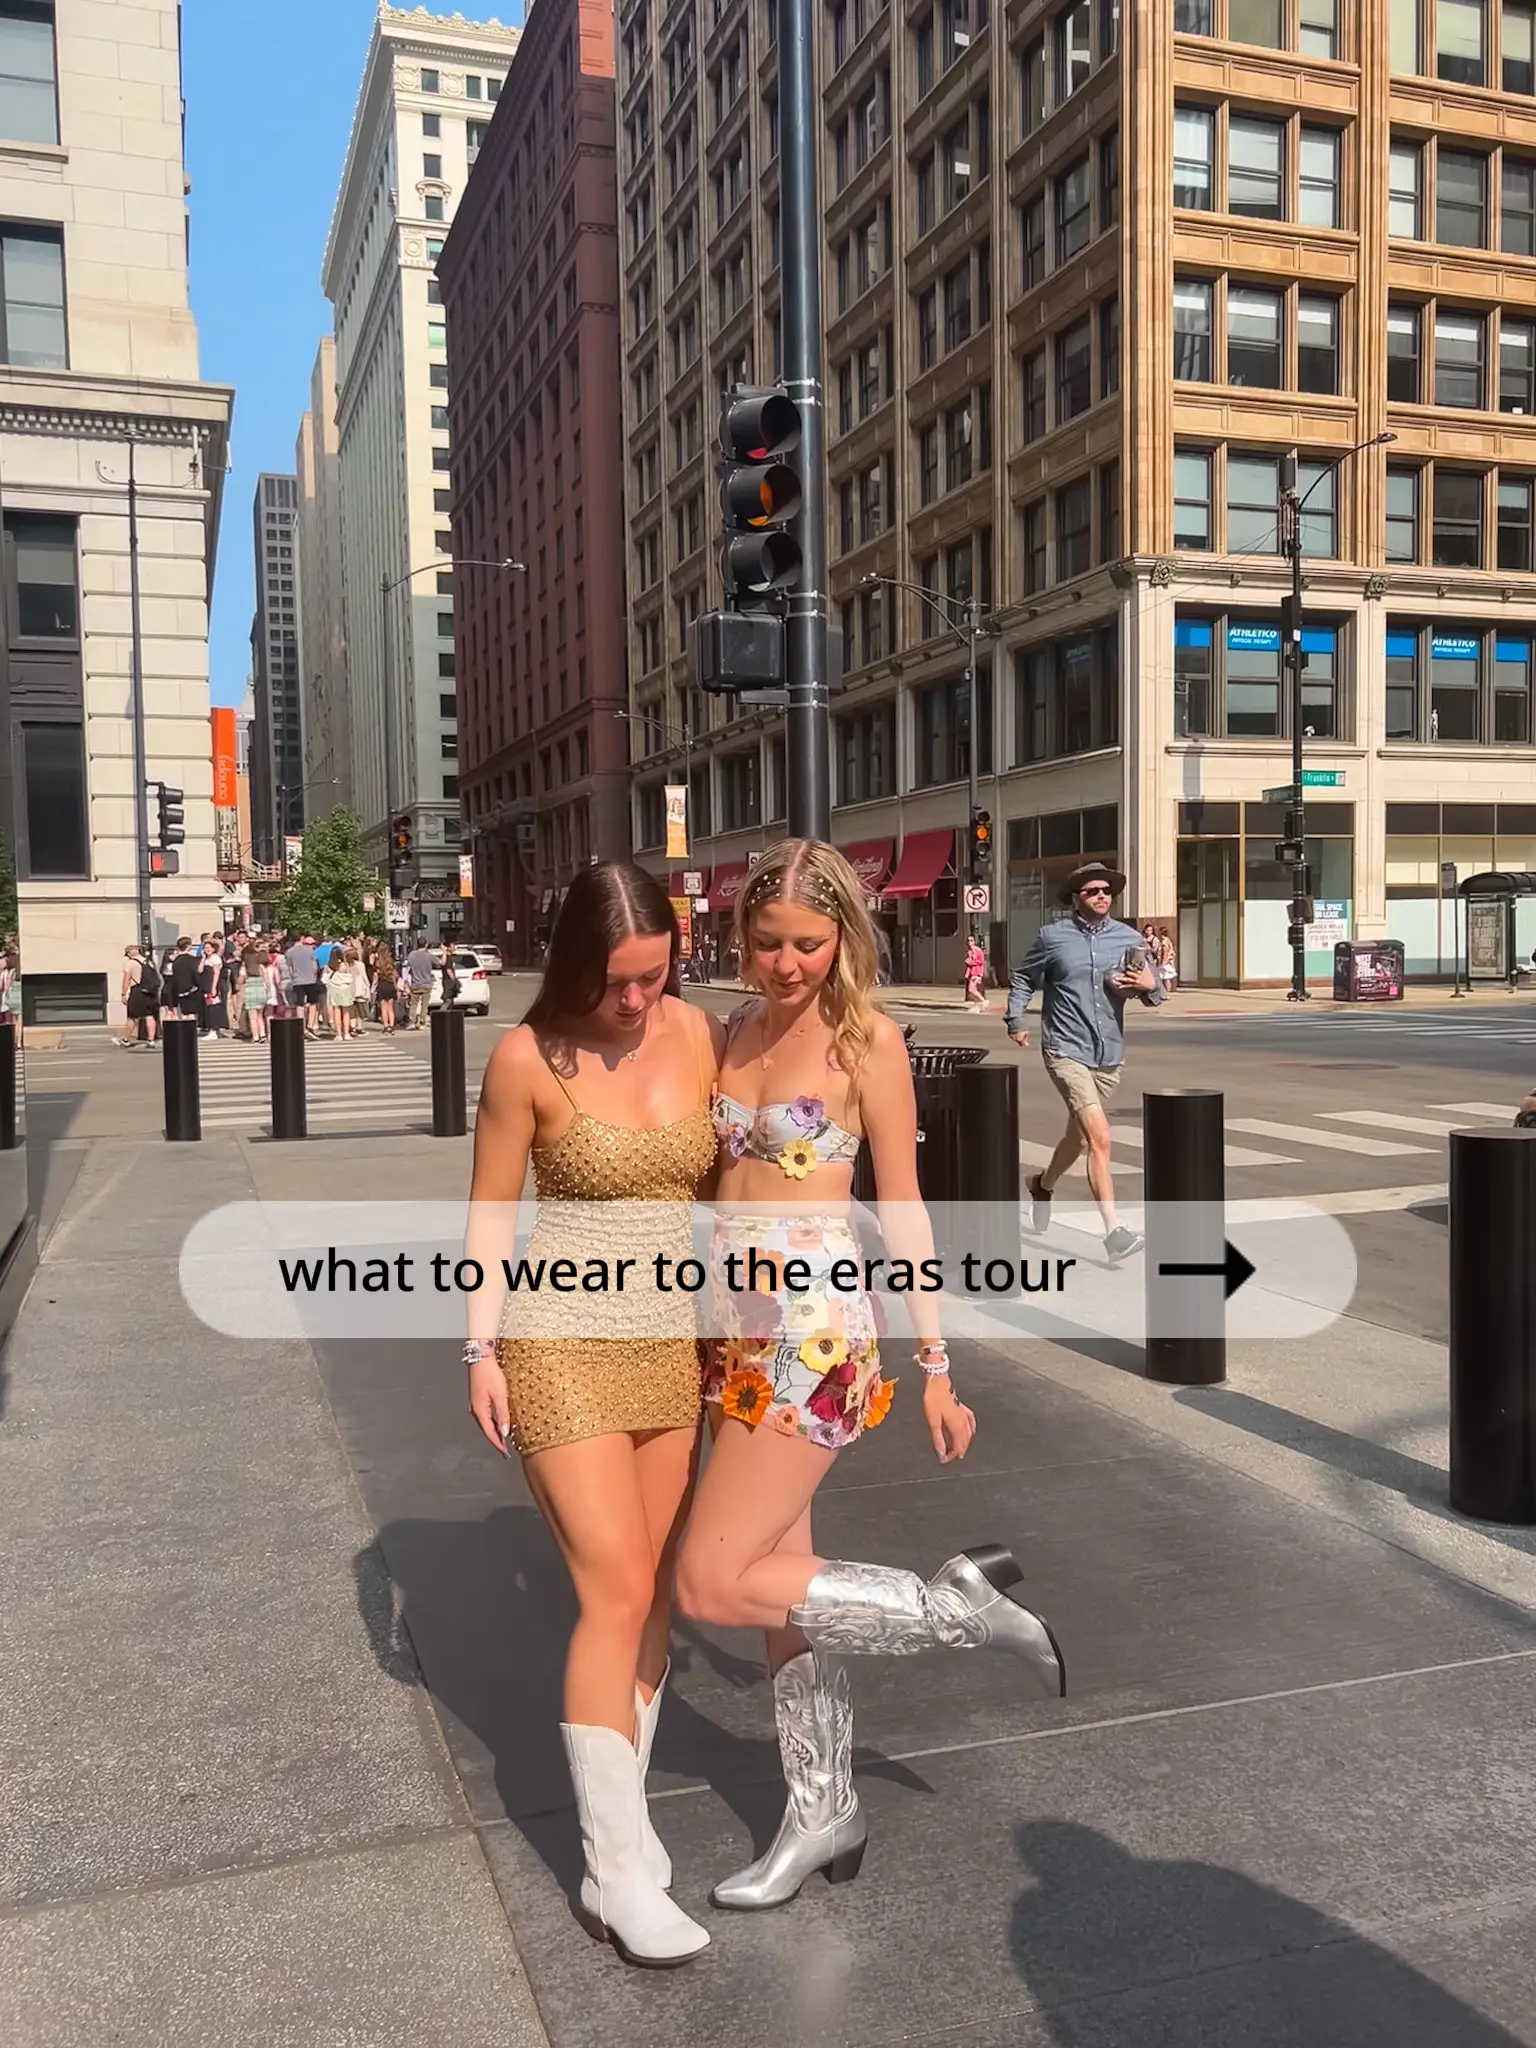 Taylor Swift Eras Tour: What to Wear's images